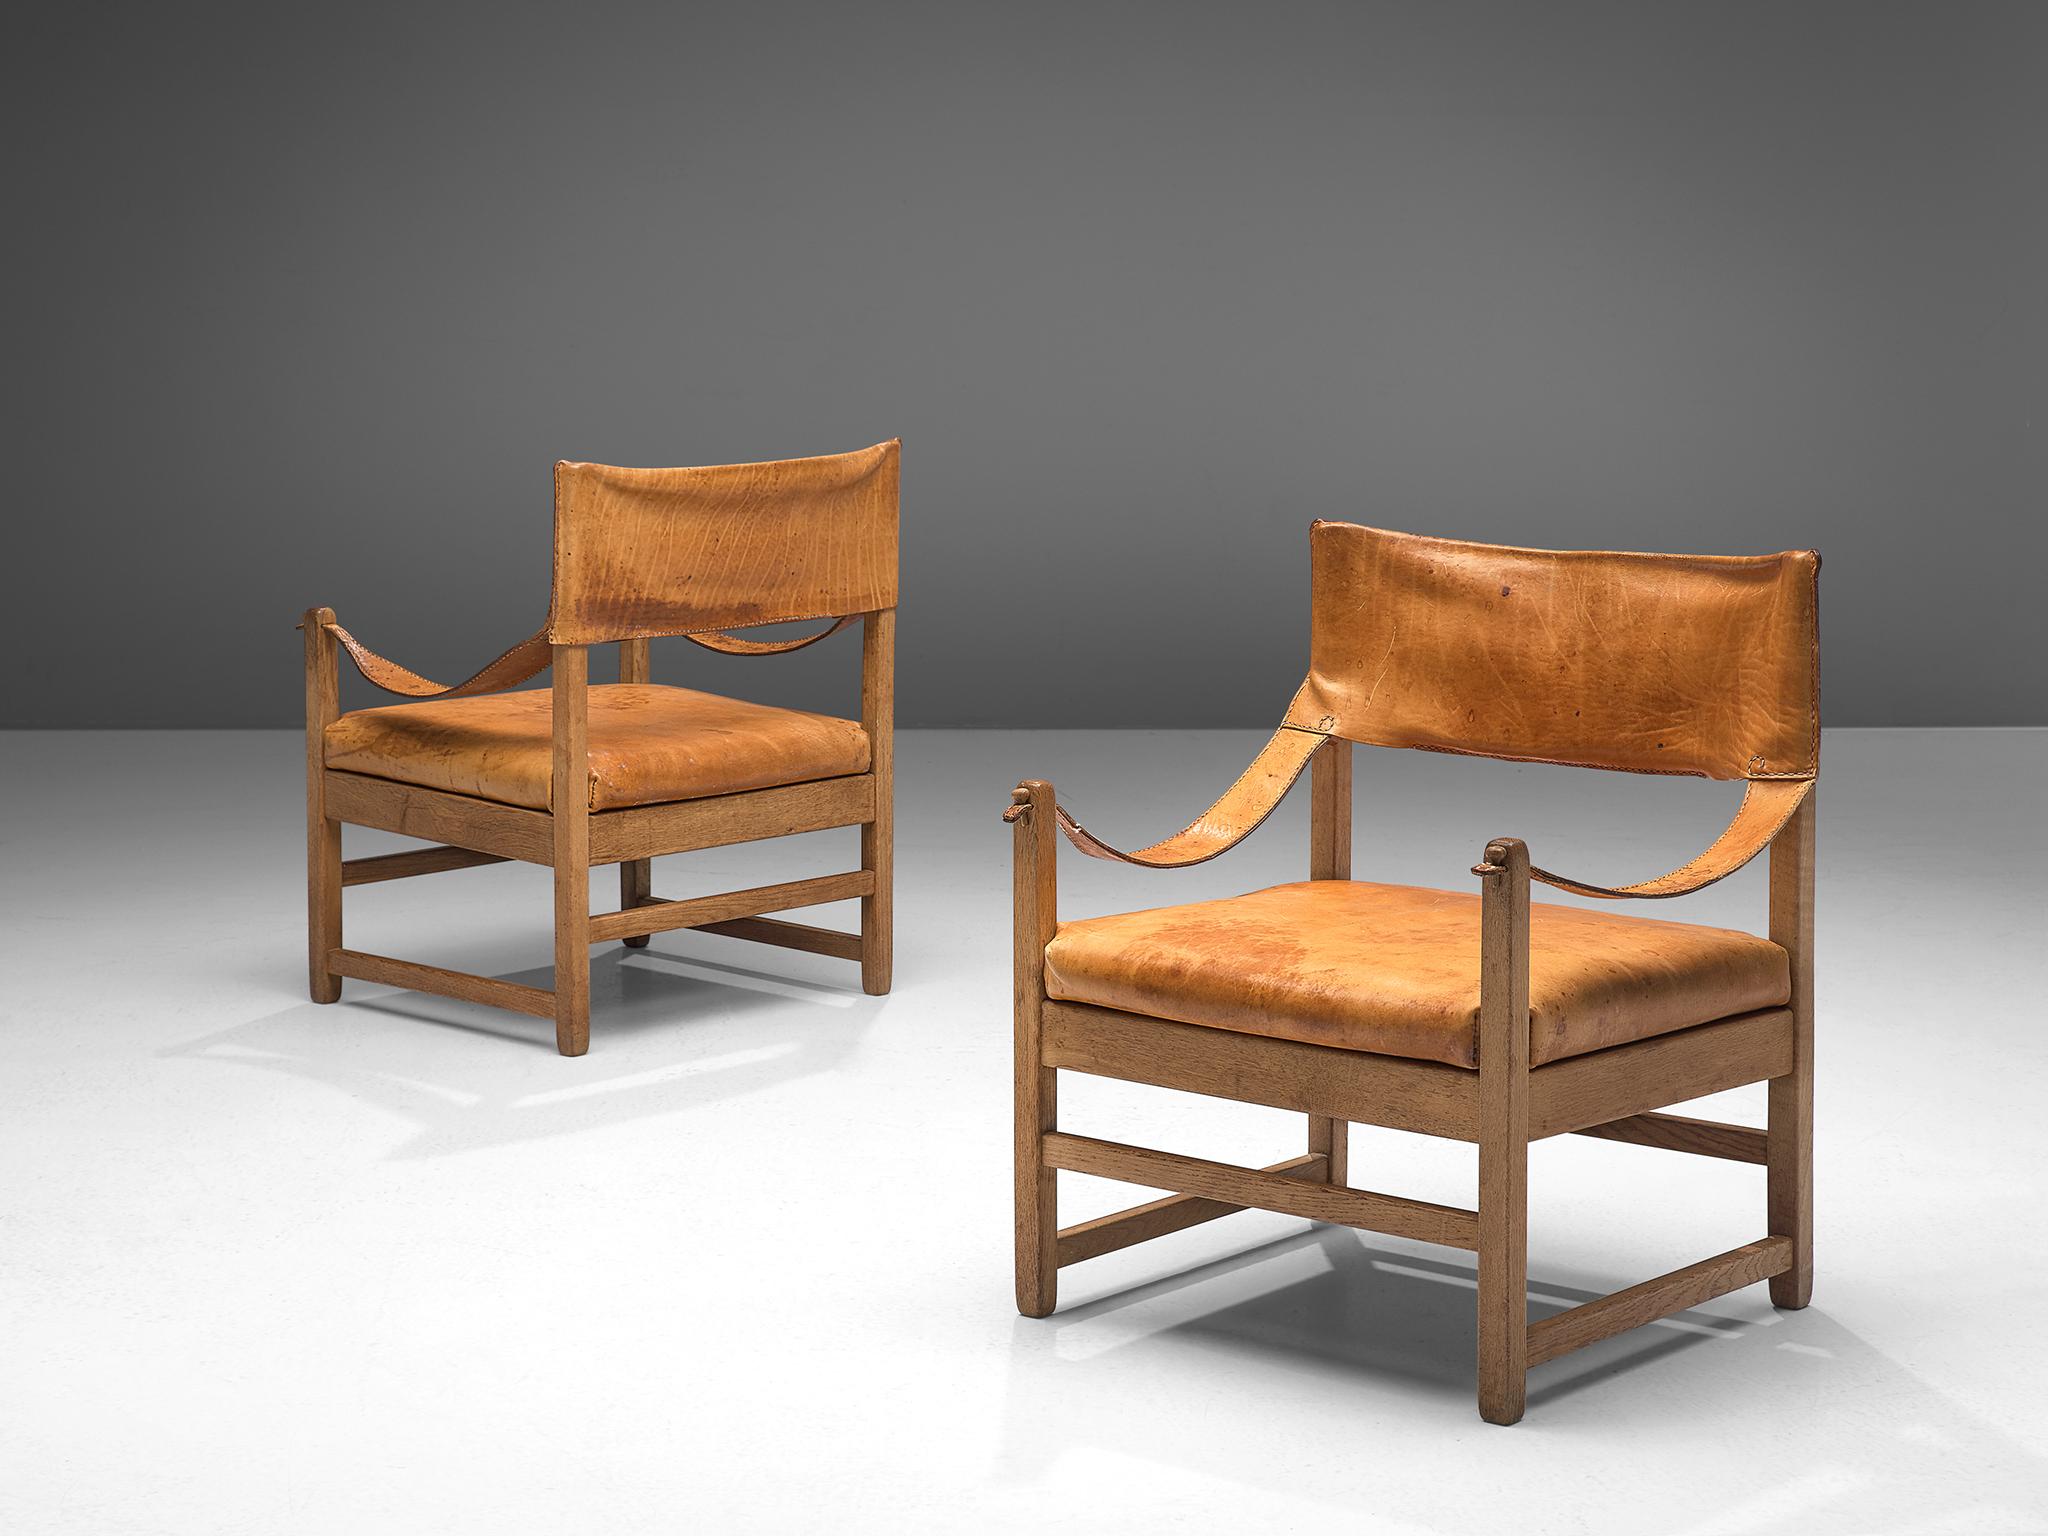 Grand lounge chairs, oak and cognac leather, France, 1960s.

This set of two lounge chairs is designed in France, made in solid oak and upholstered with cognac saddle leather. This set has a wonderful rich patina that makes this set extraordinary